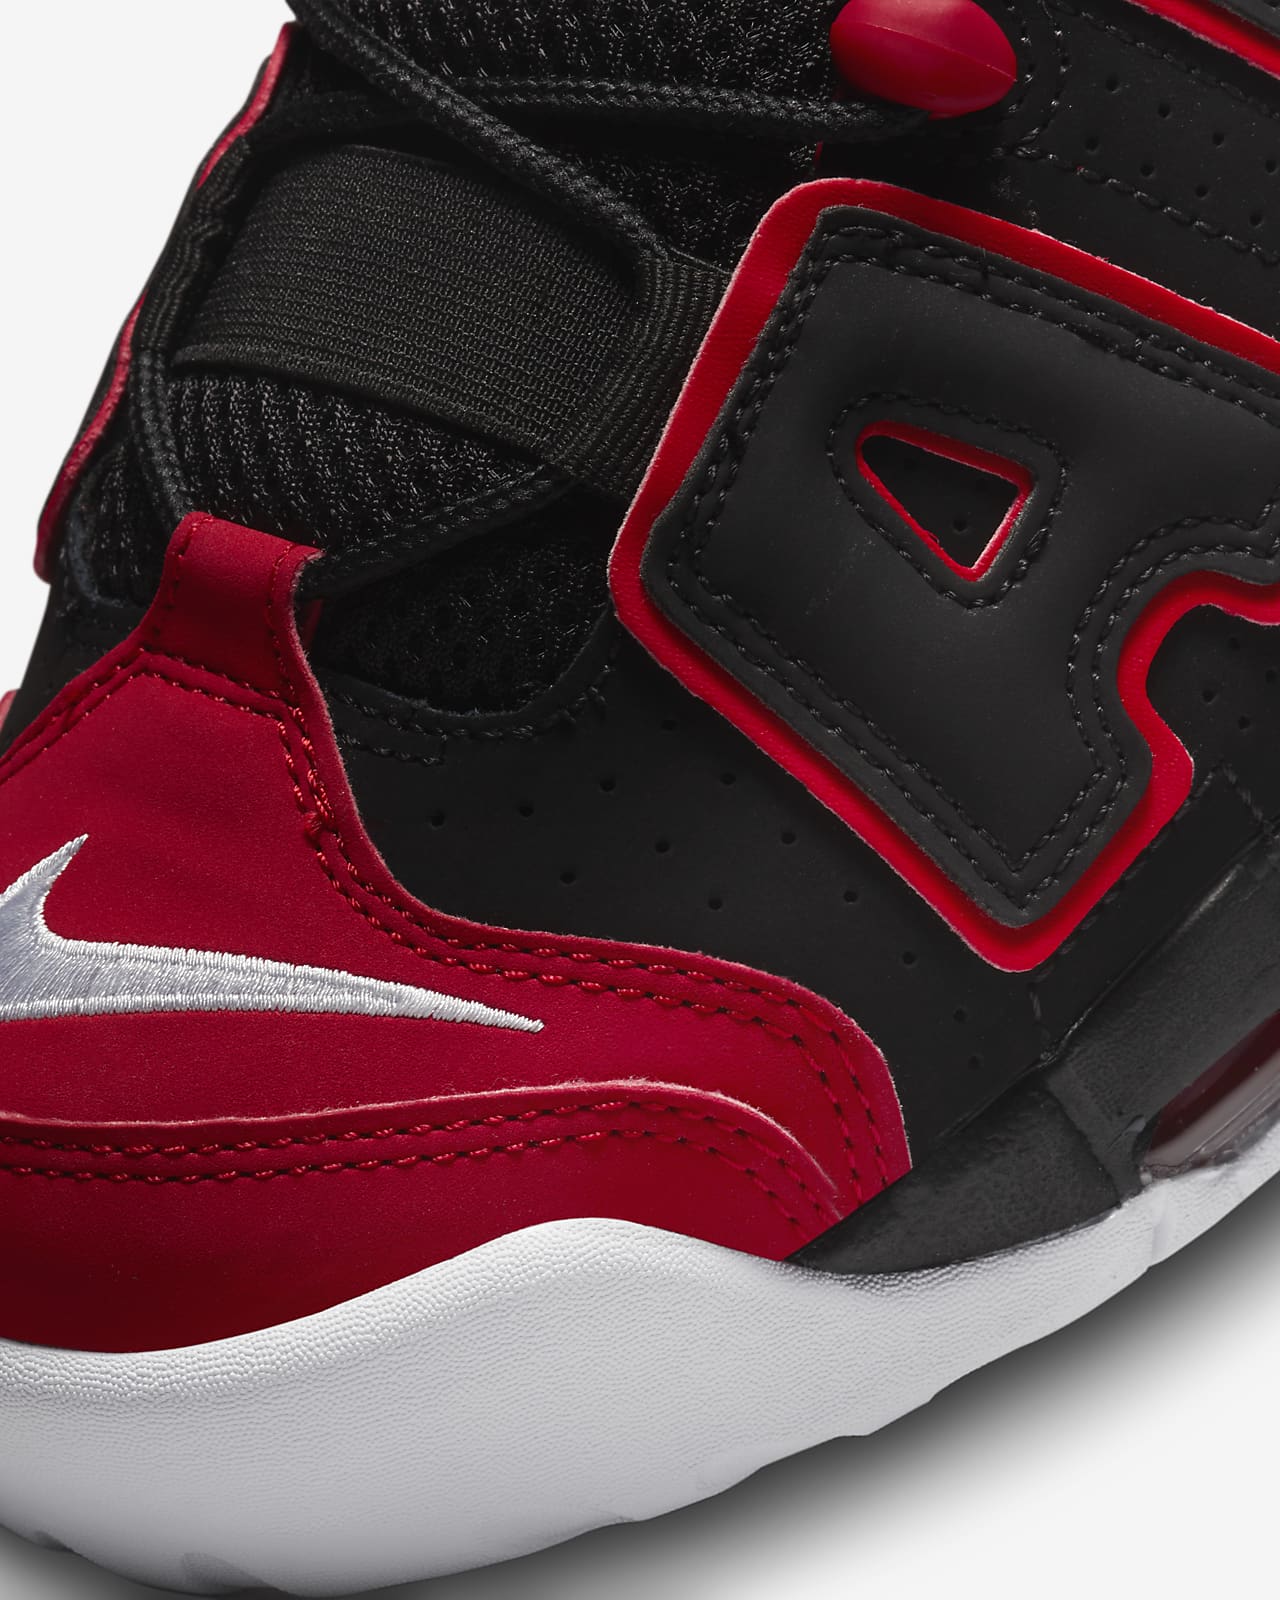 This Nike Air More Uptempo Gets Accented By Grey And Red - Sneaker News